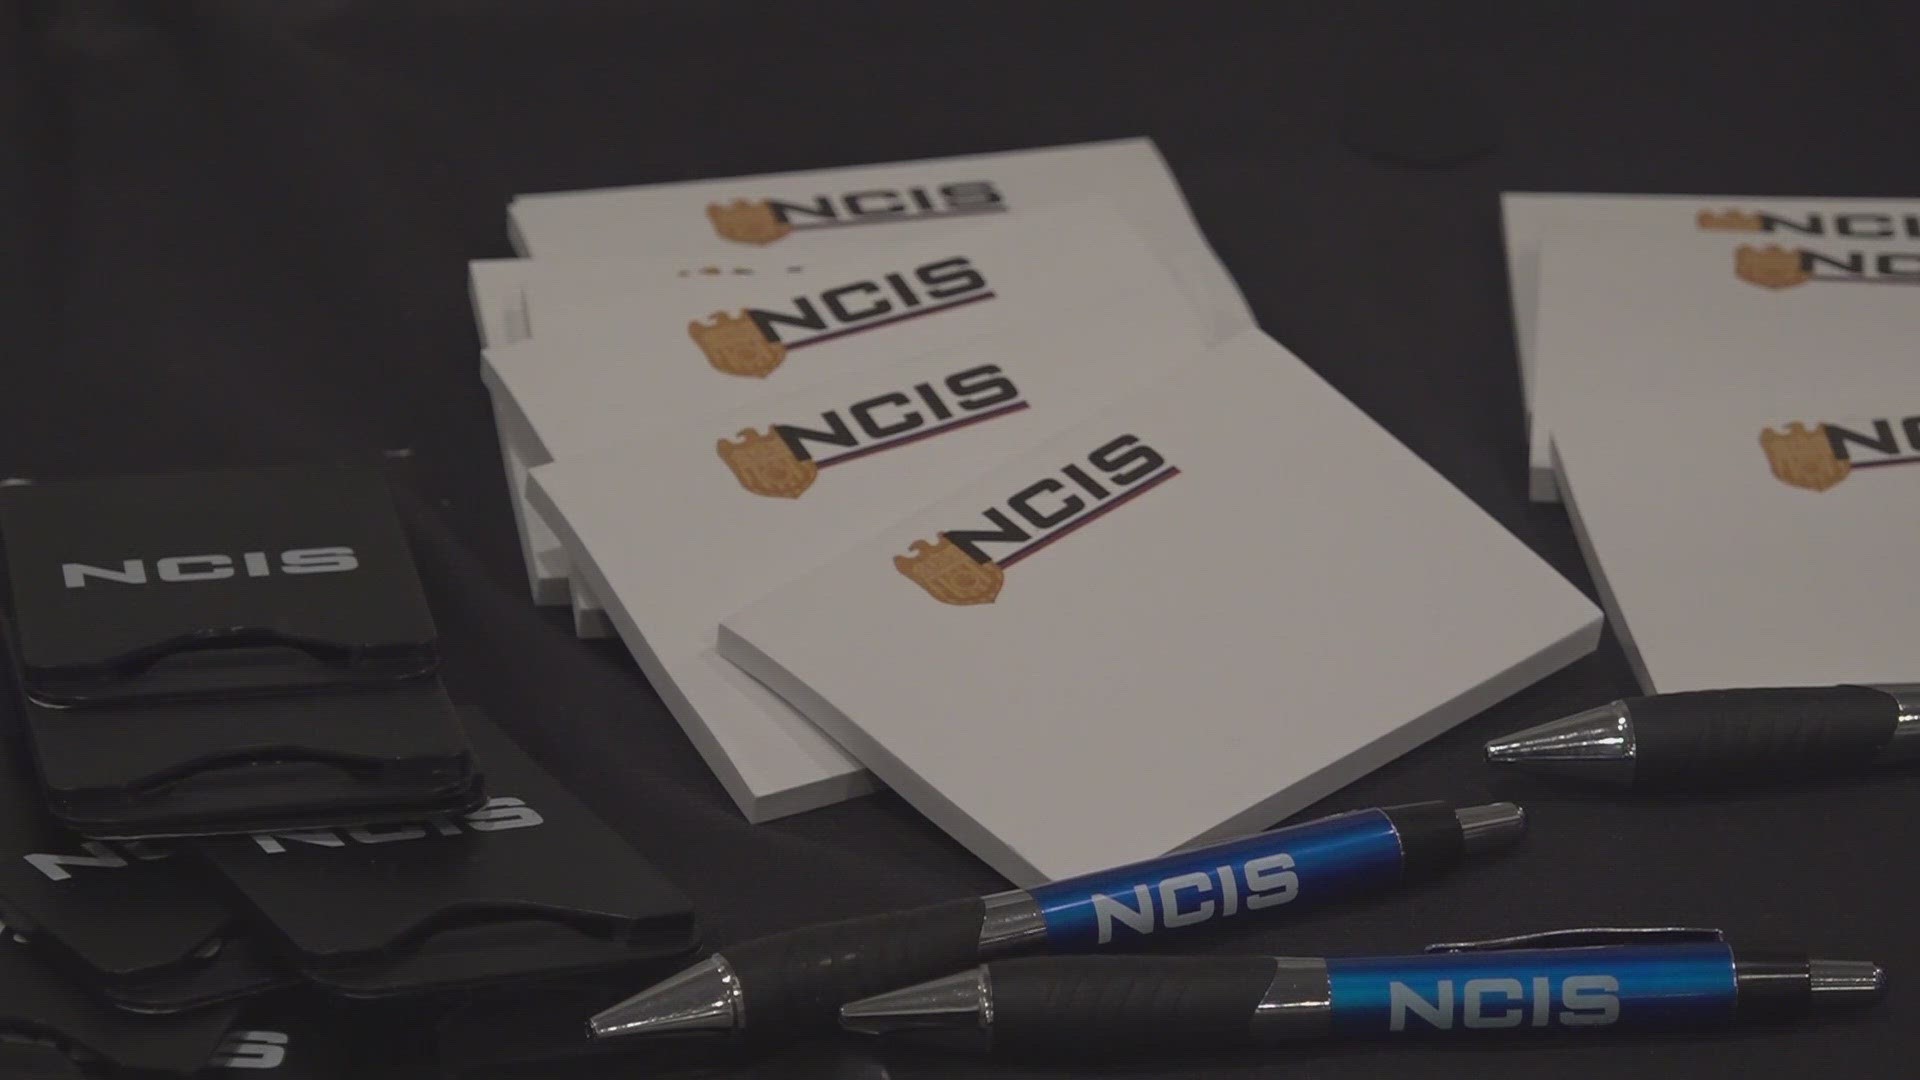 NCIS special agents told KENS 5 the government needs Hispanic applicants to better engage communities across the country.